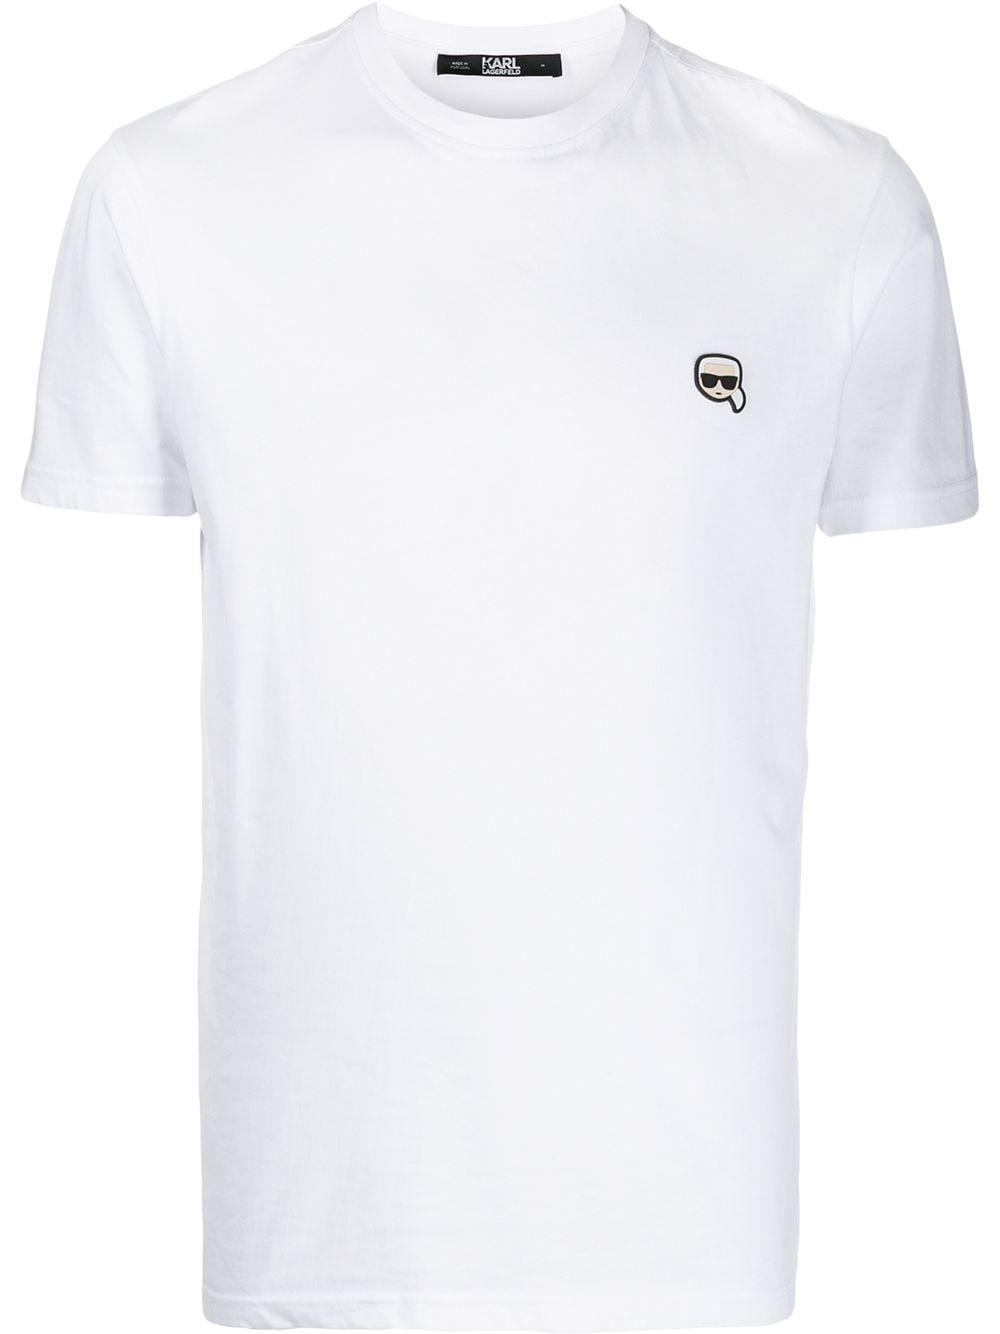 Karl Lagerfeld Cotton Small Patch T-shirt in White for Men - Lyst